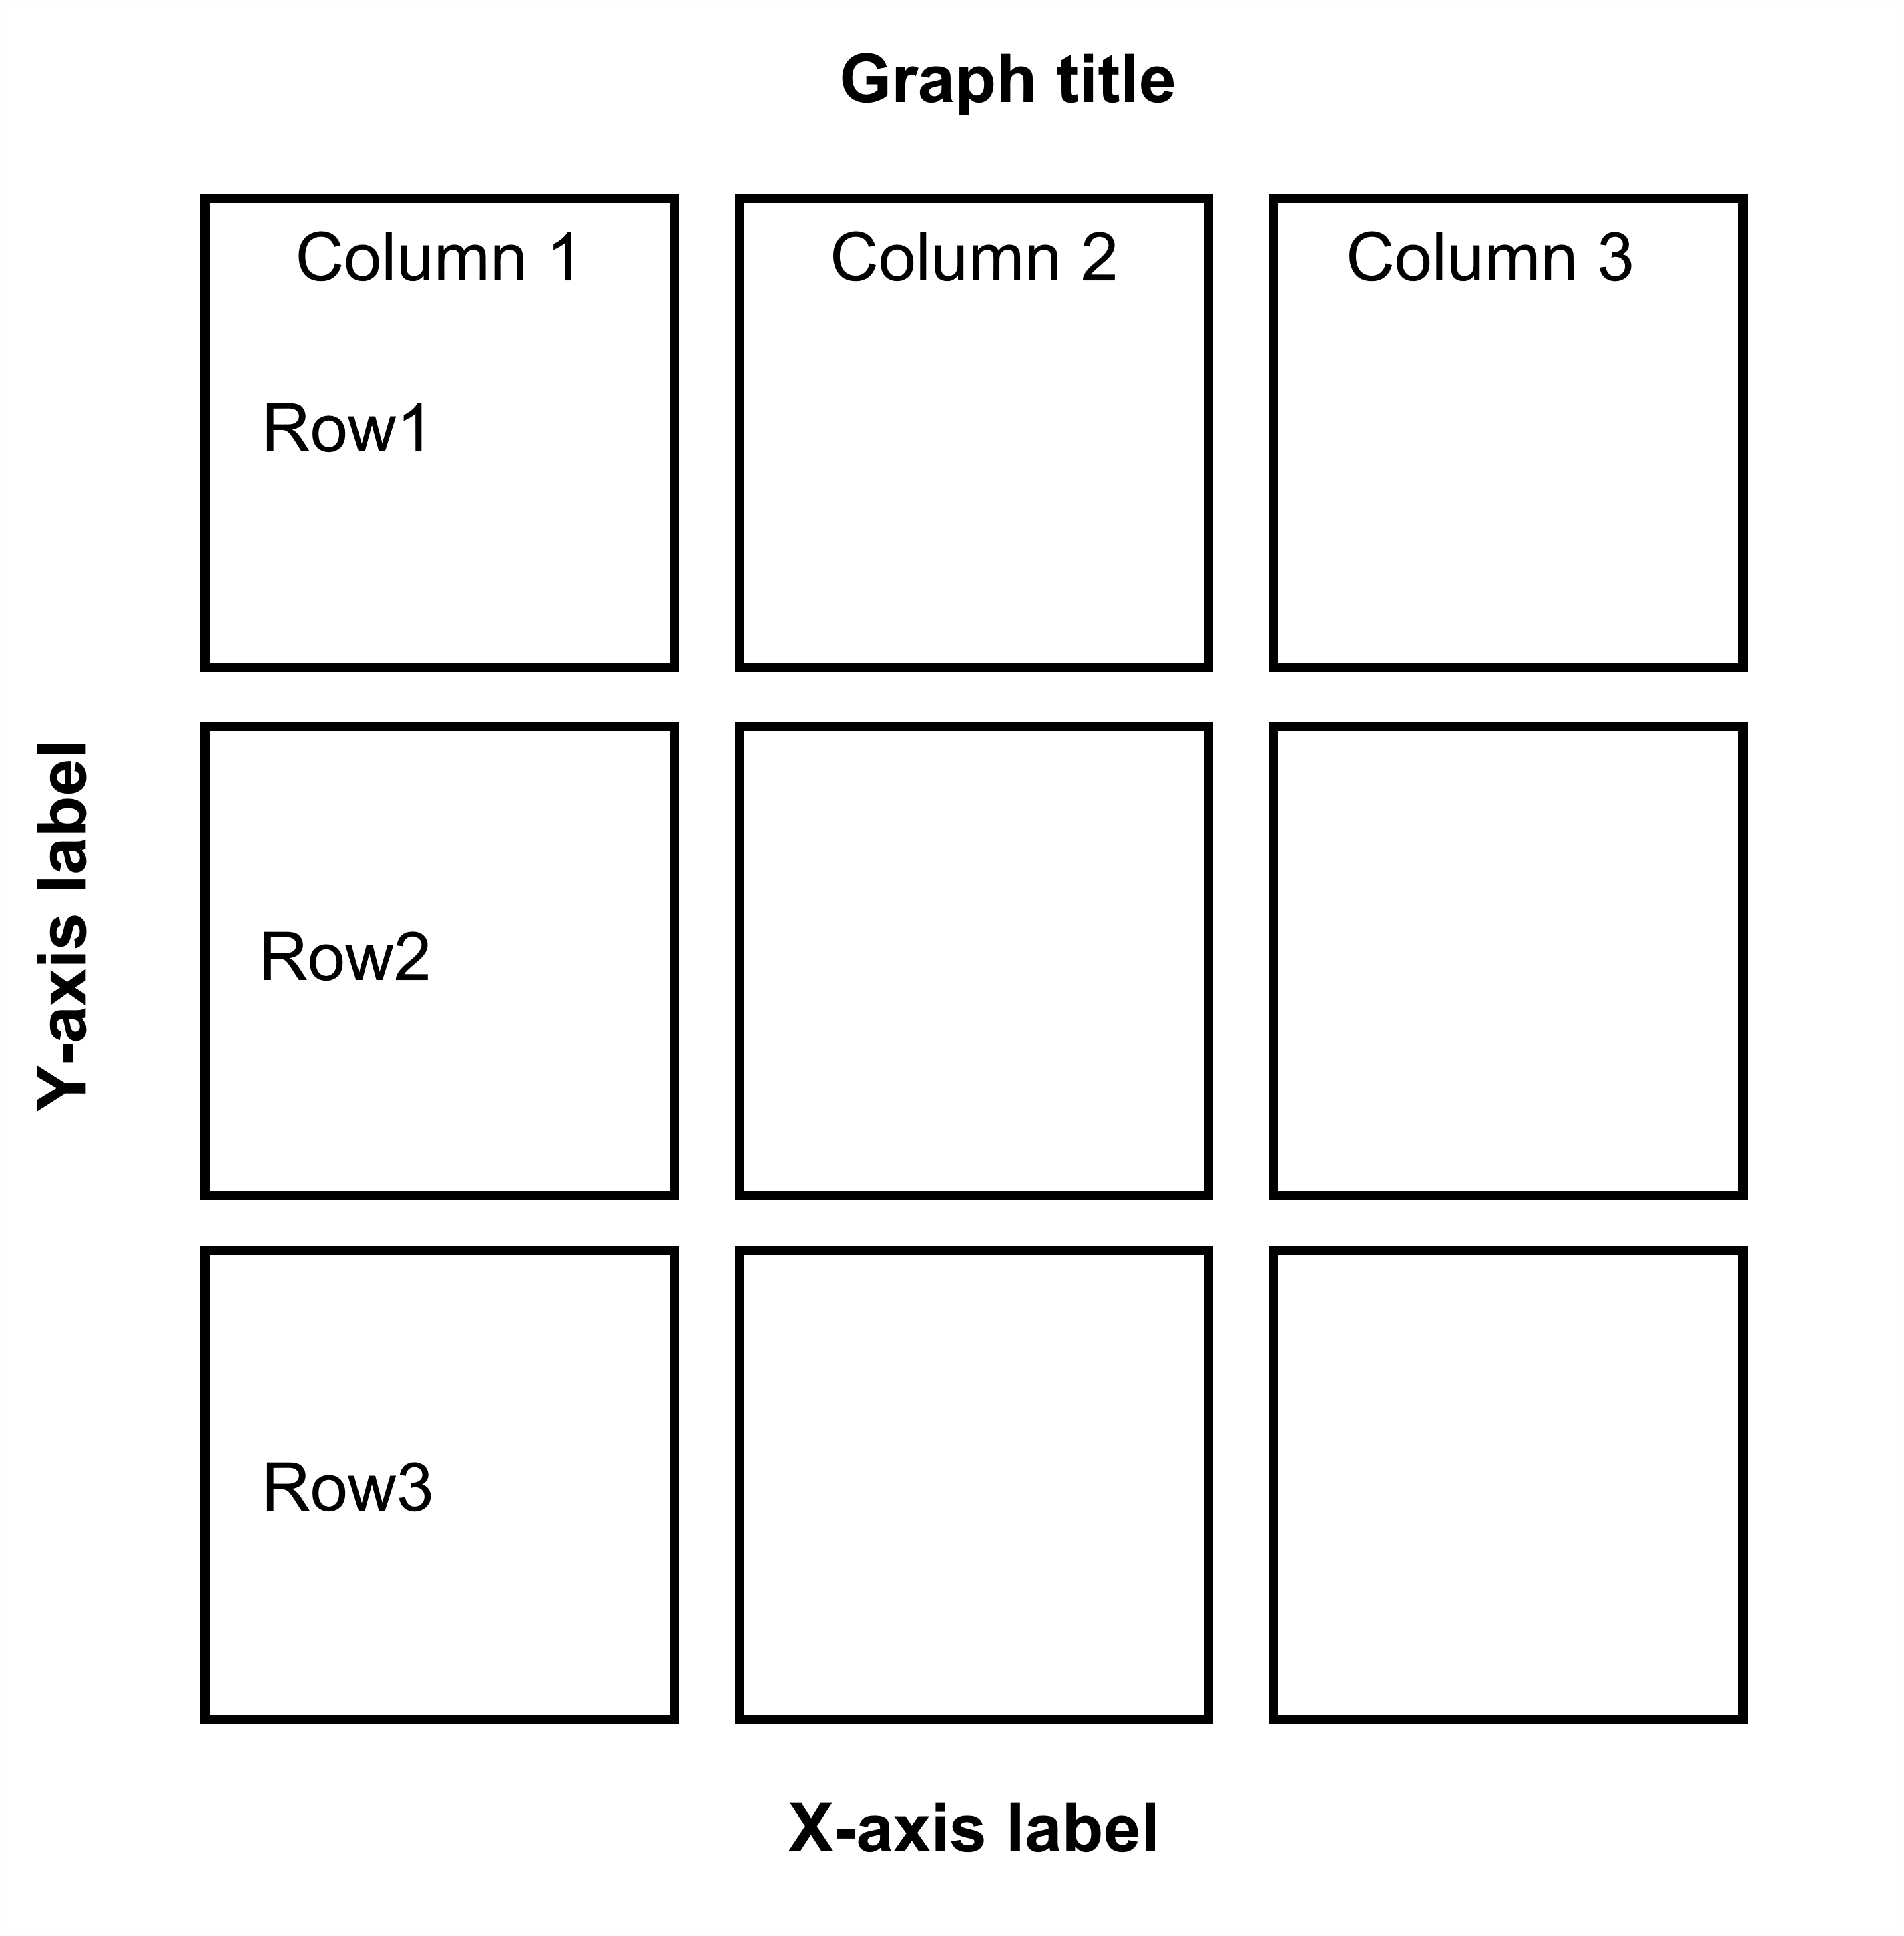 3x3 figure. It has 3 columns and 3 rows